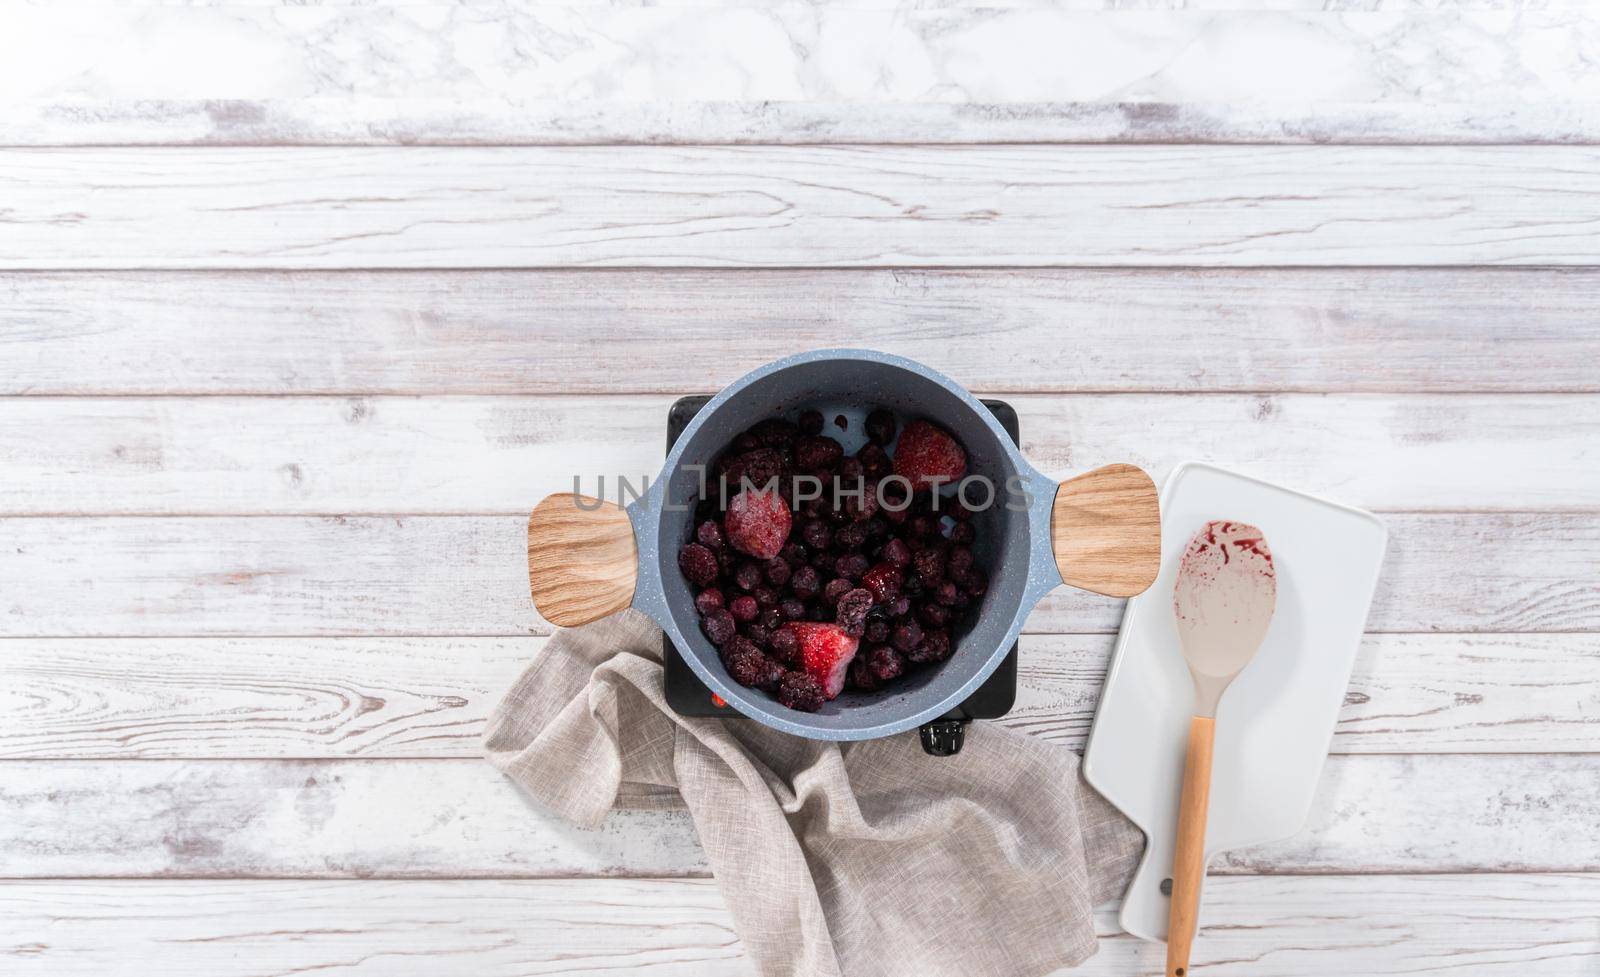 Flat lay. Preparing mixed berry compote from frozen berries in a nonstick cooking pot.